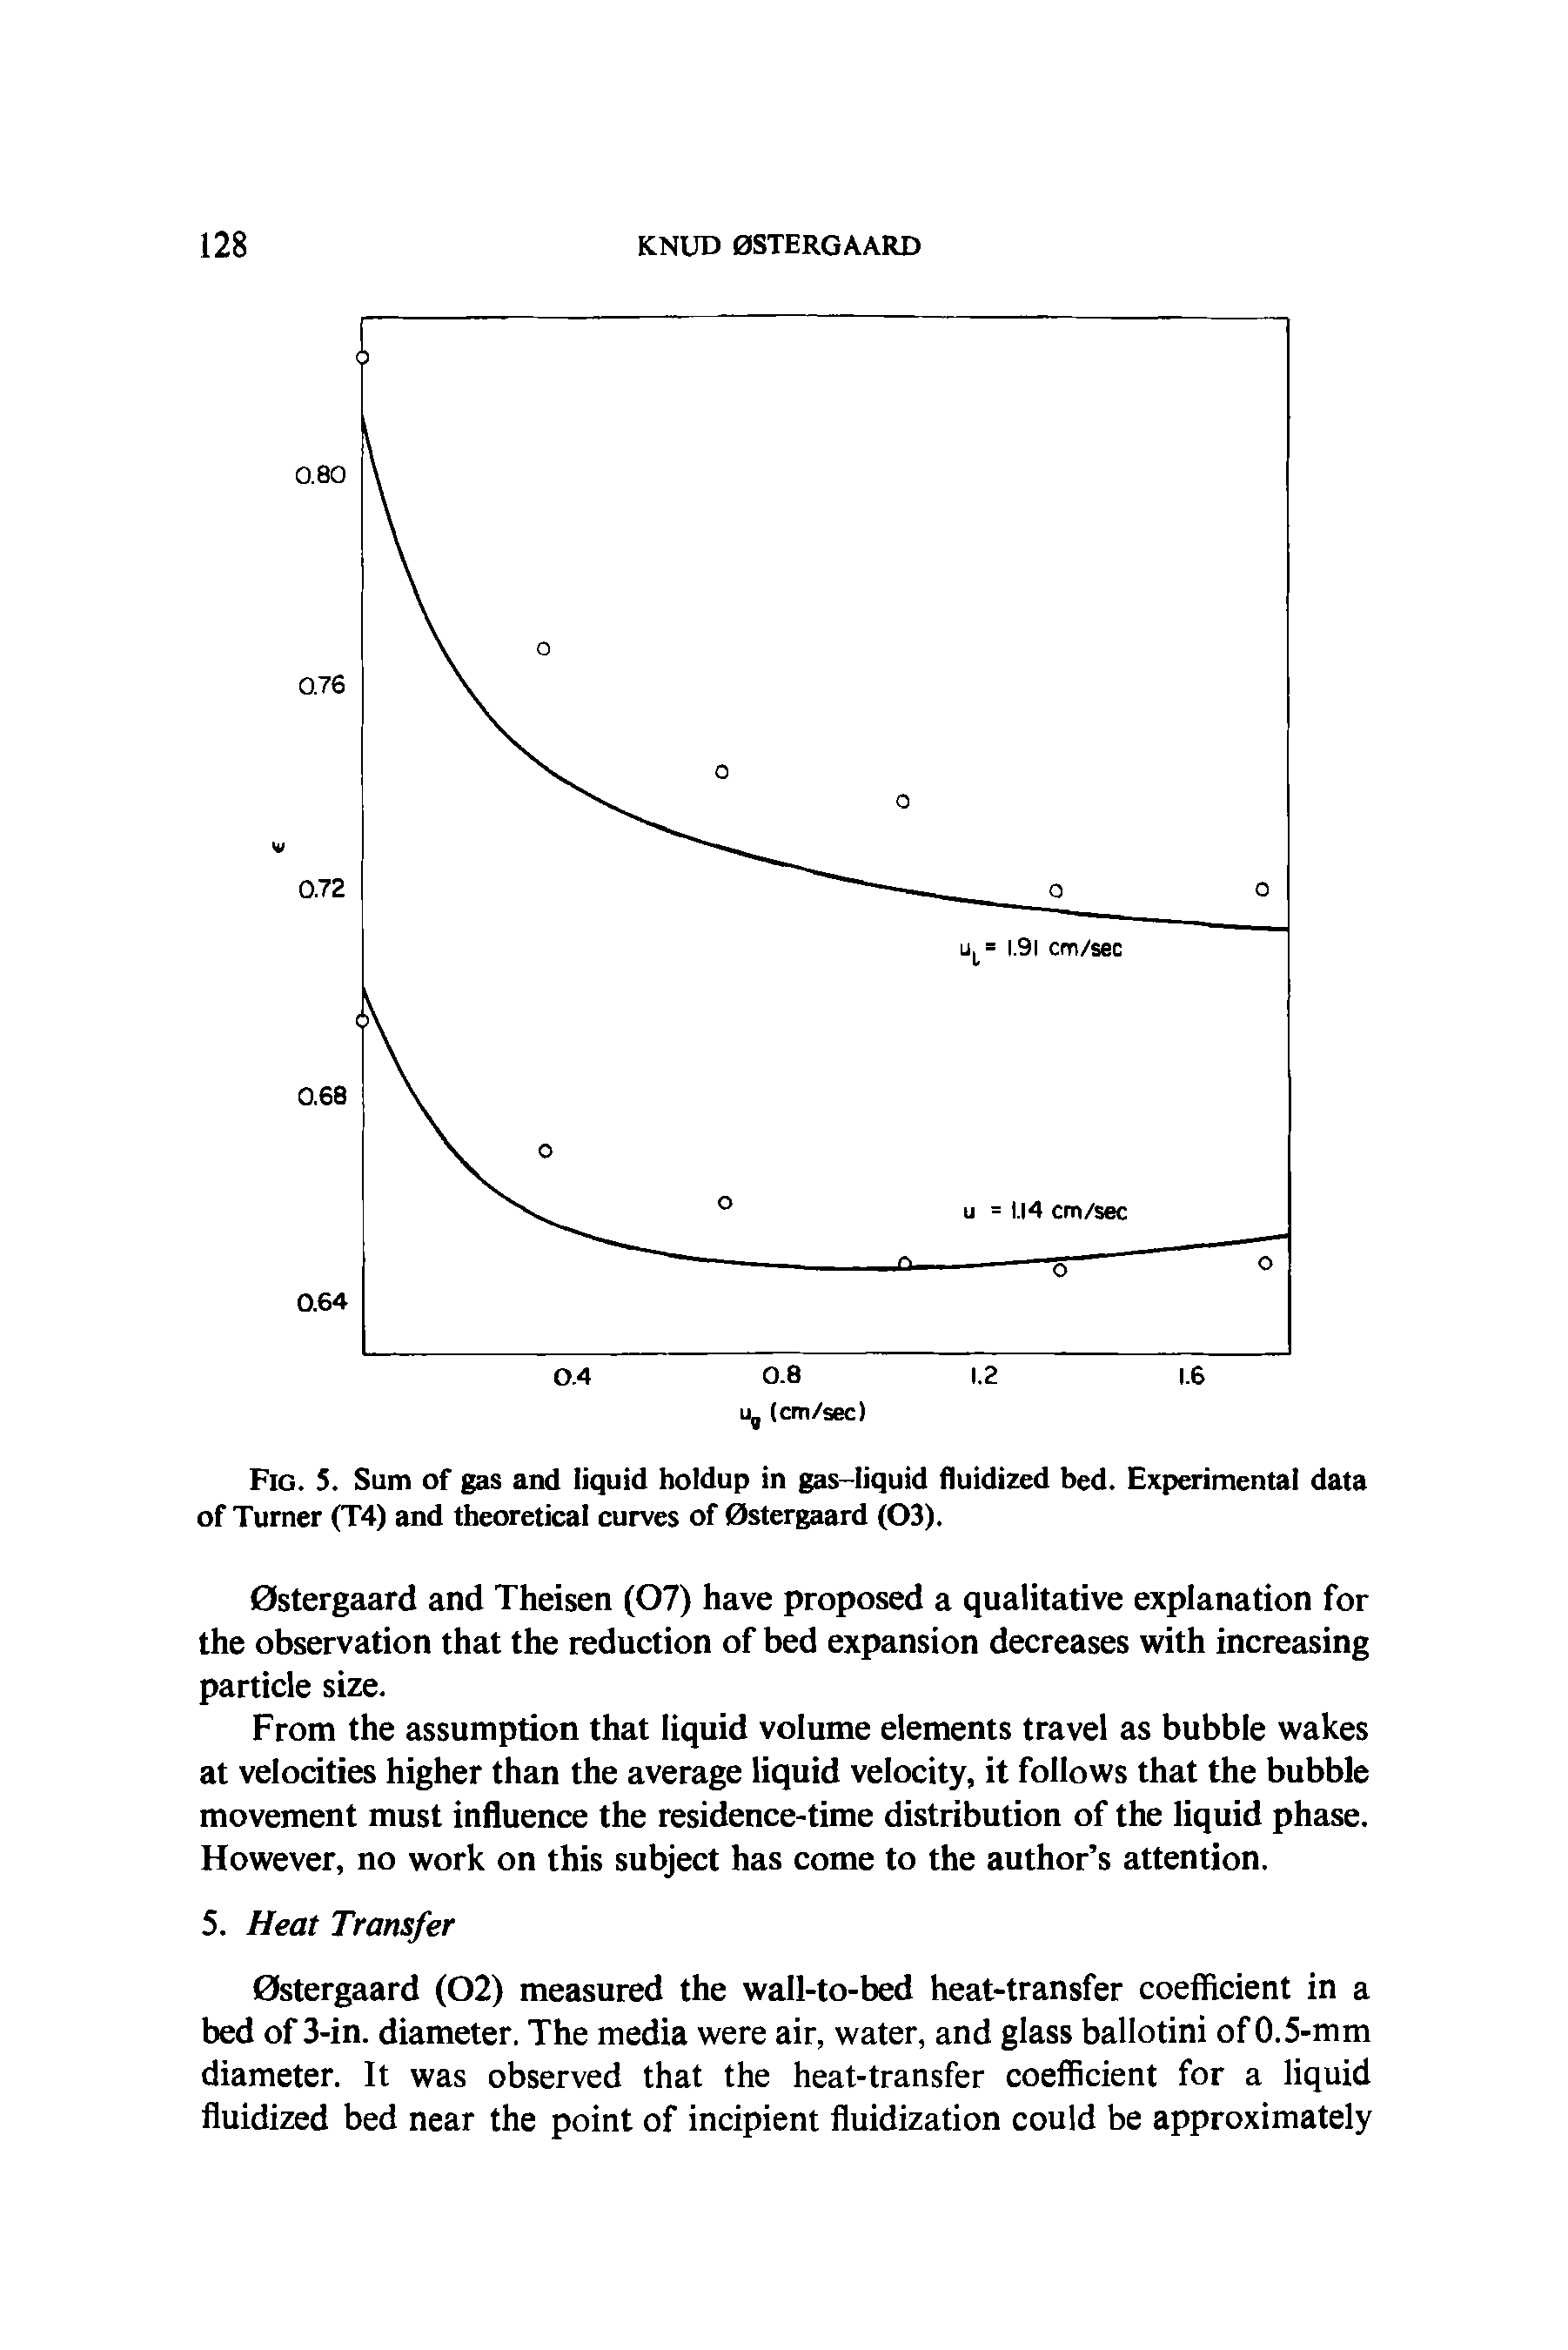 Fig. 5. Sum of gas and liquid holdup in gas-liquid fluidized bed. Experimental data of Turner (T4) and theoretical curves of 0stergaard (03).